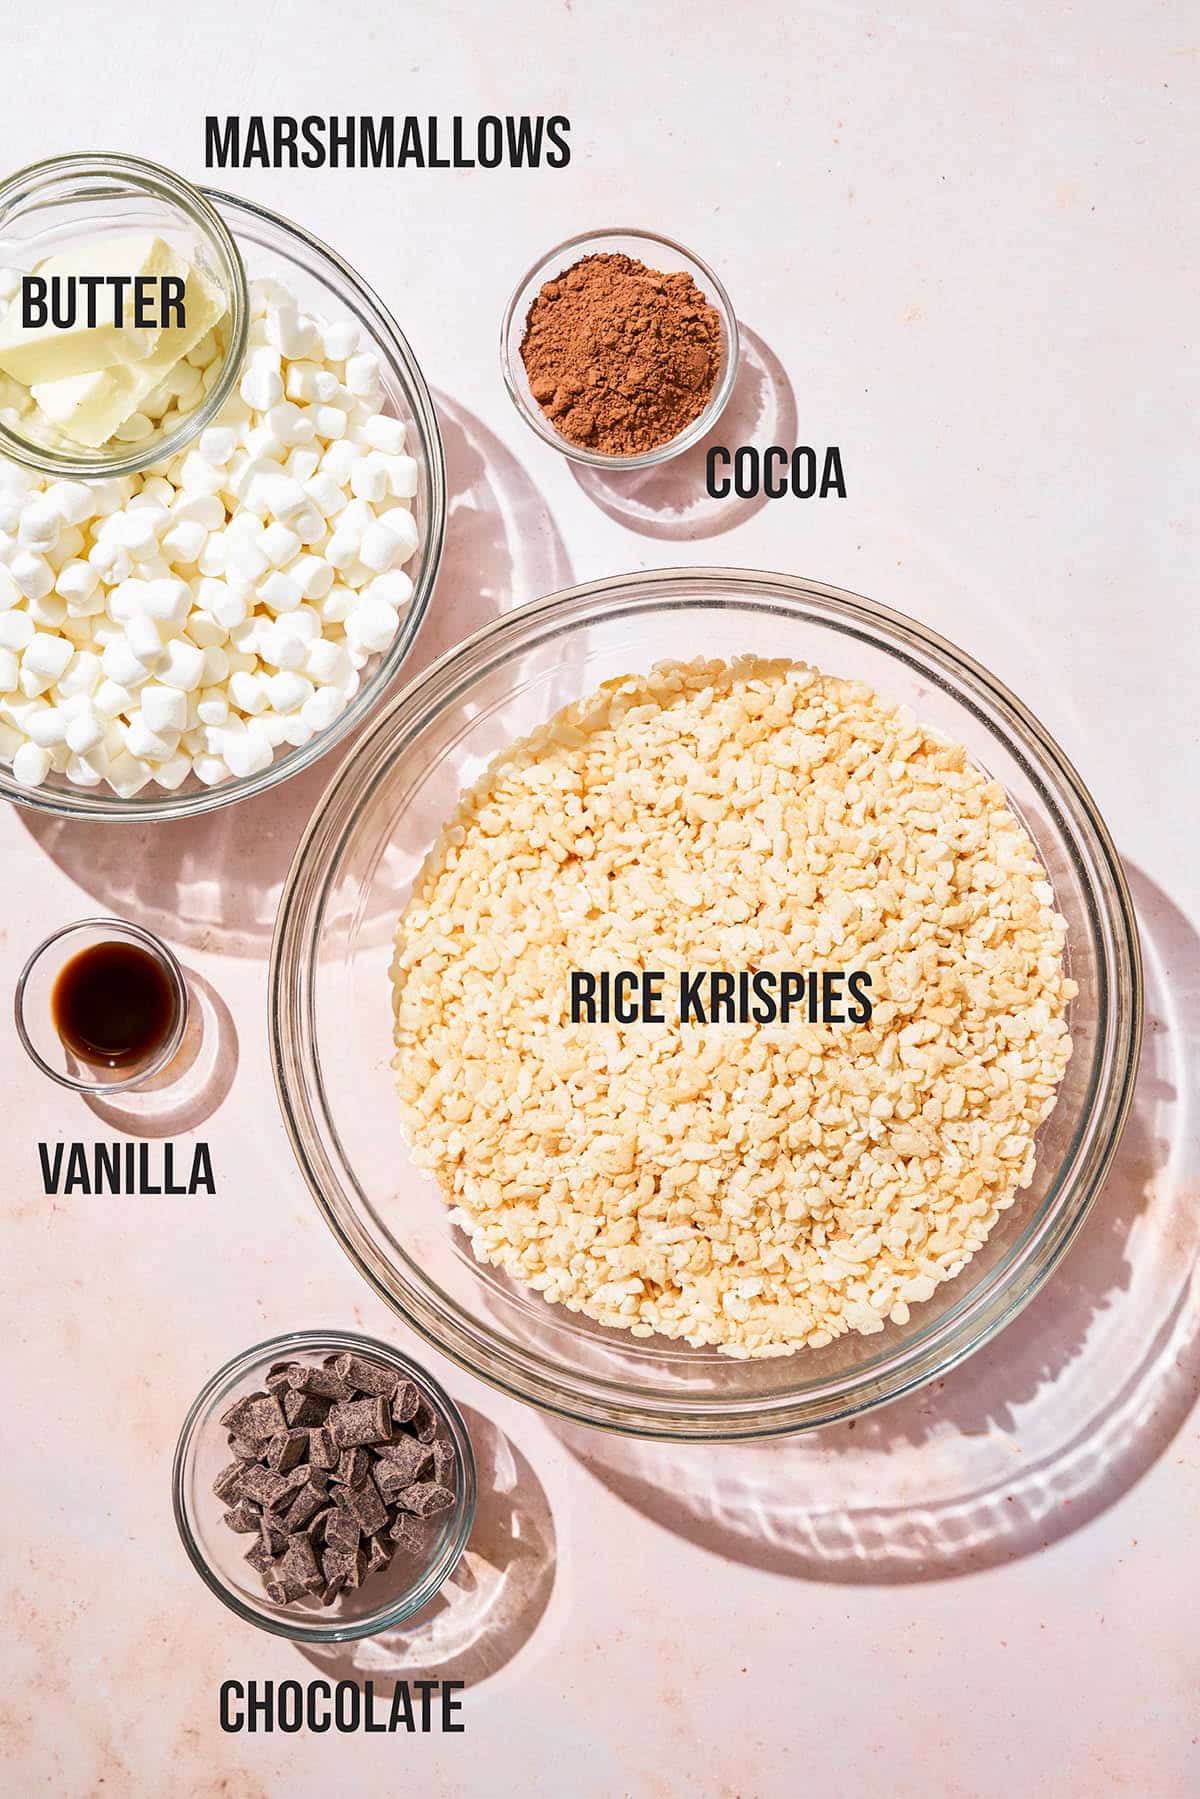 Chocolate rice krispie treats ingredients with labels.